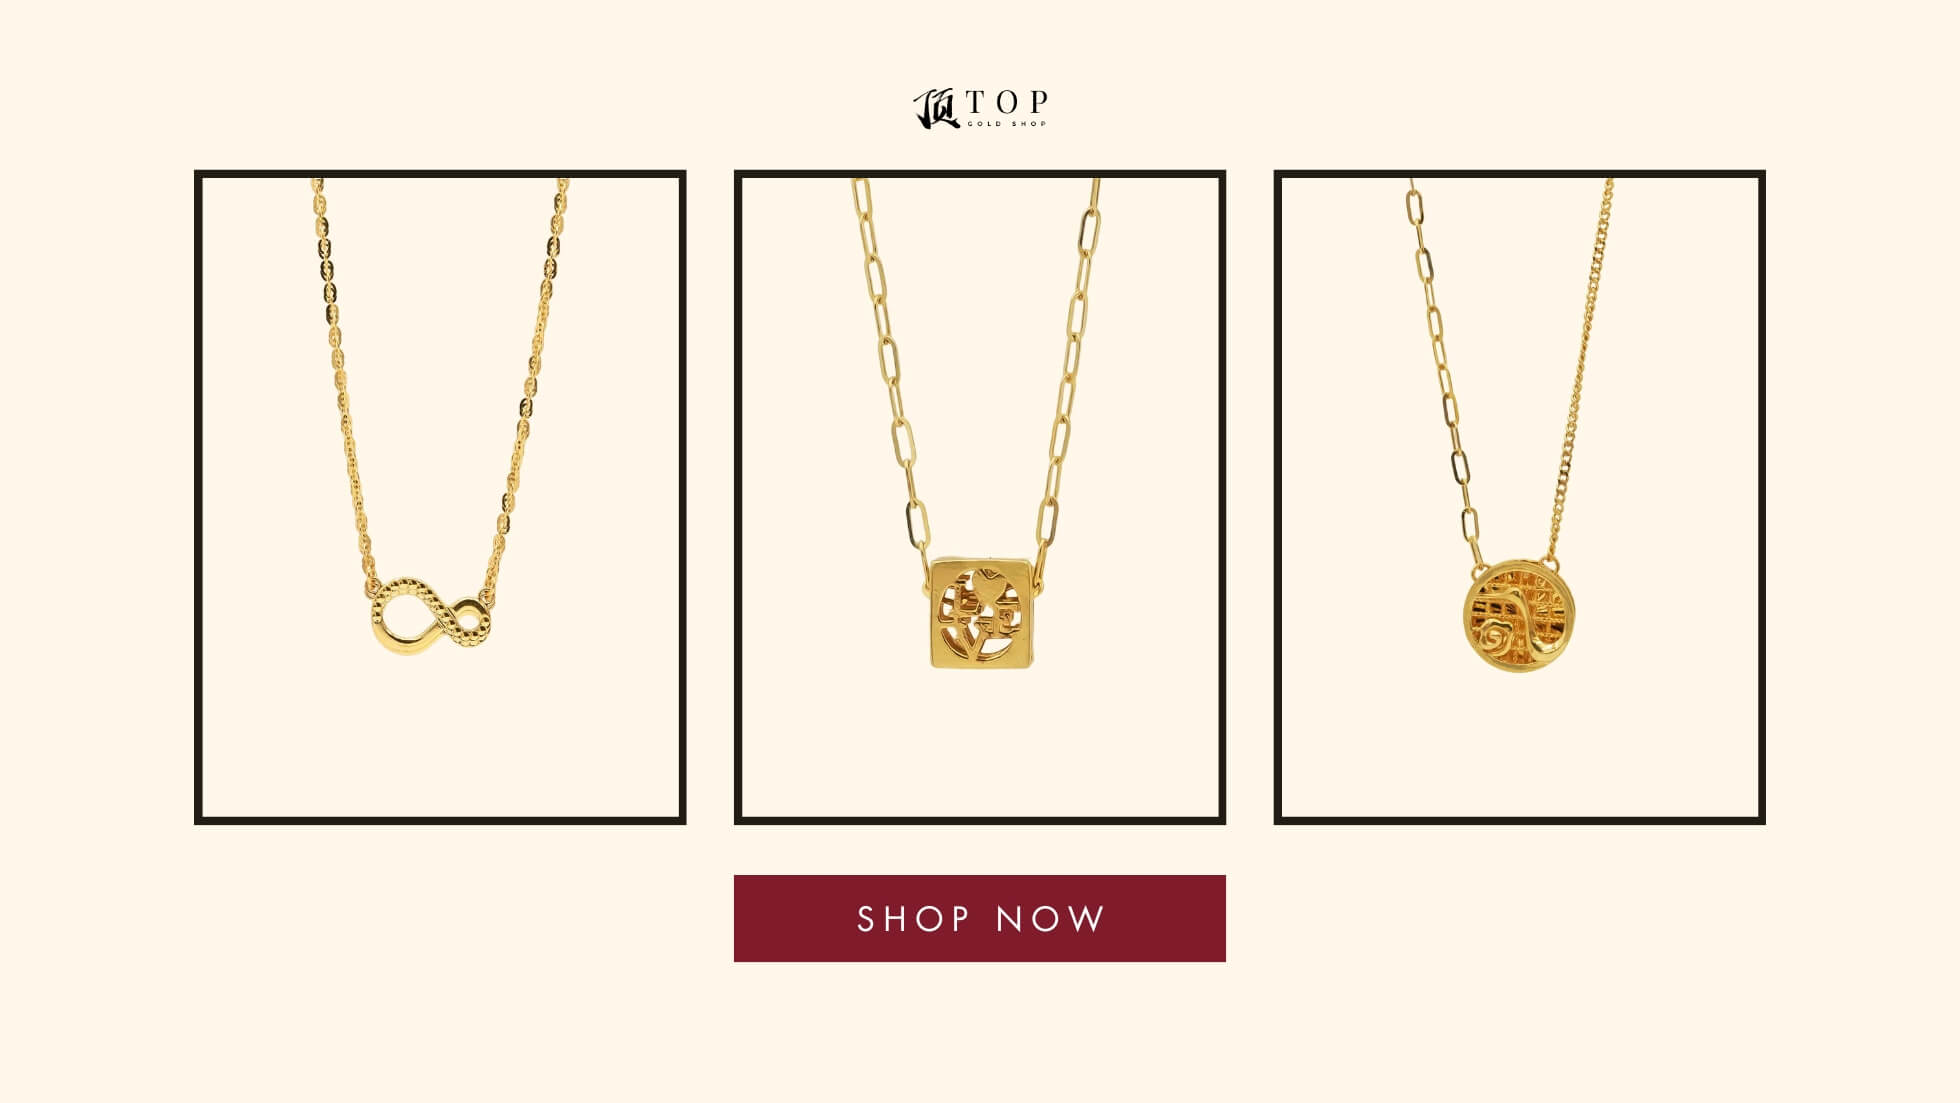 3 item necklace from top gold shop, to boost your gold jewellery style